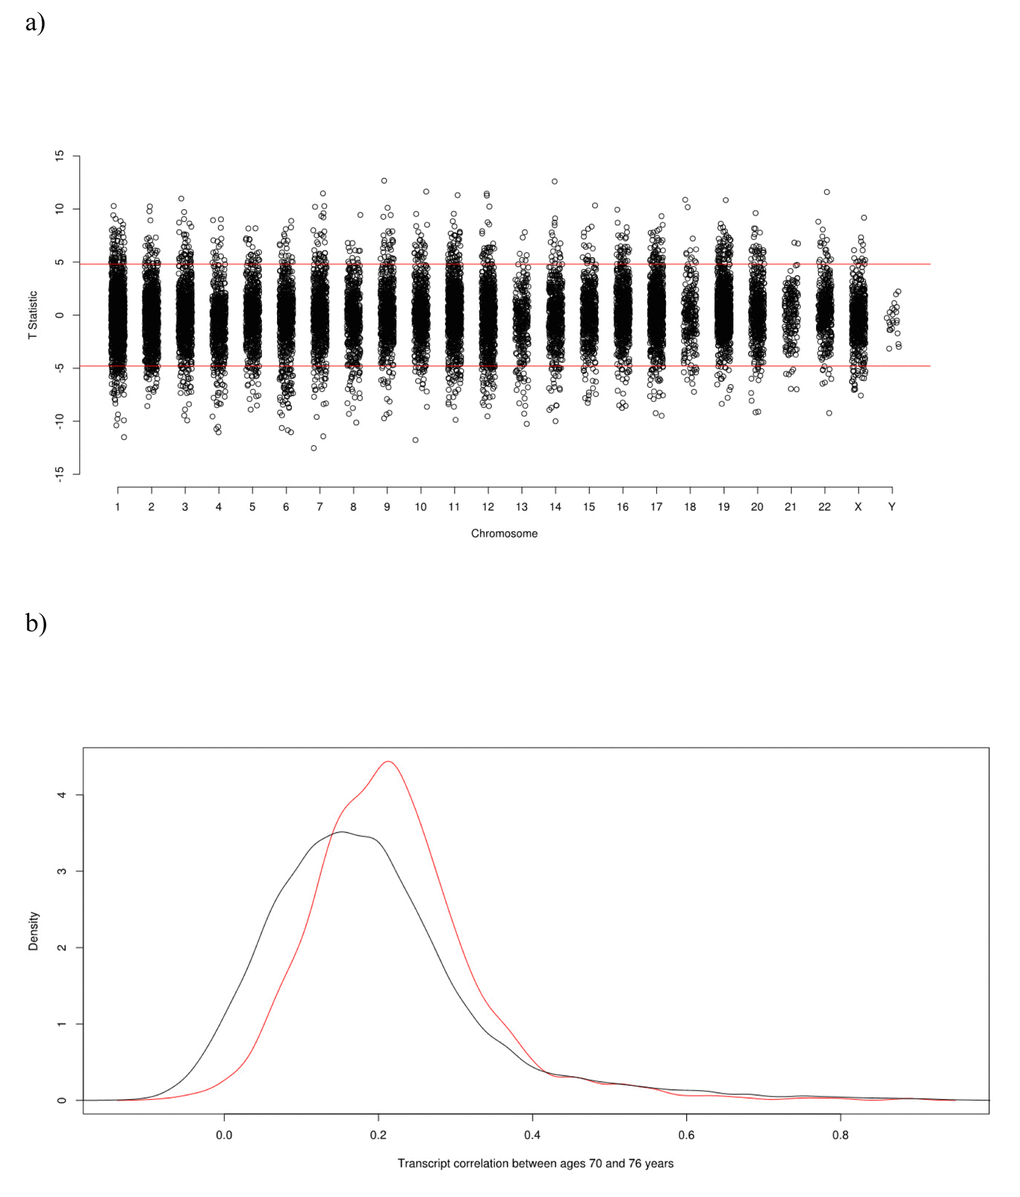 (a) Transcriptome-Wide Association Study Manhattan Plot of the paired t-test T-statistic for difference in expression at age 70 and age 76. (b) Density Plot of transcript (Pearson) correlations between ages 70 and 76. The red curve is the correlation distribution for the Bonferroni corrected significant transcripts that either increase or decrease in expression levels with age; the black curve is for all transcripts.